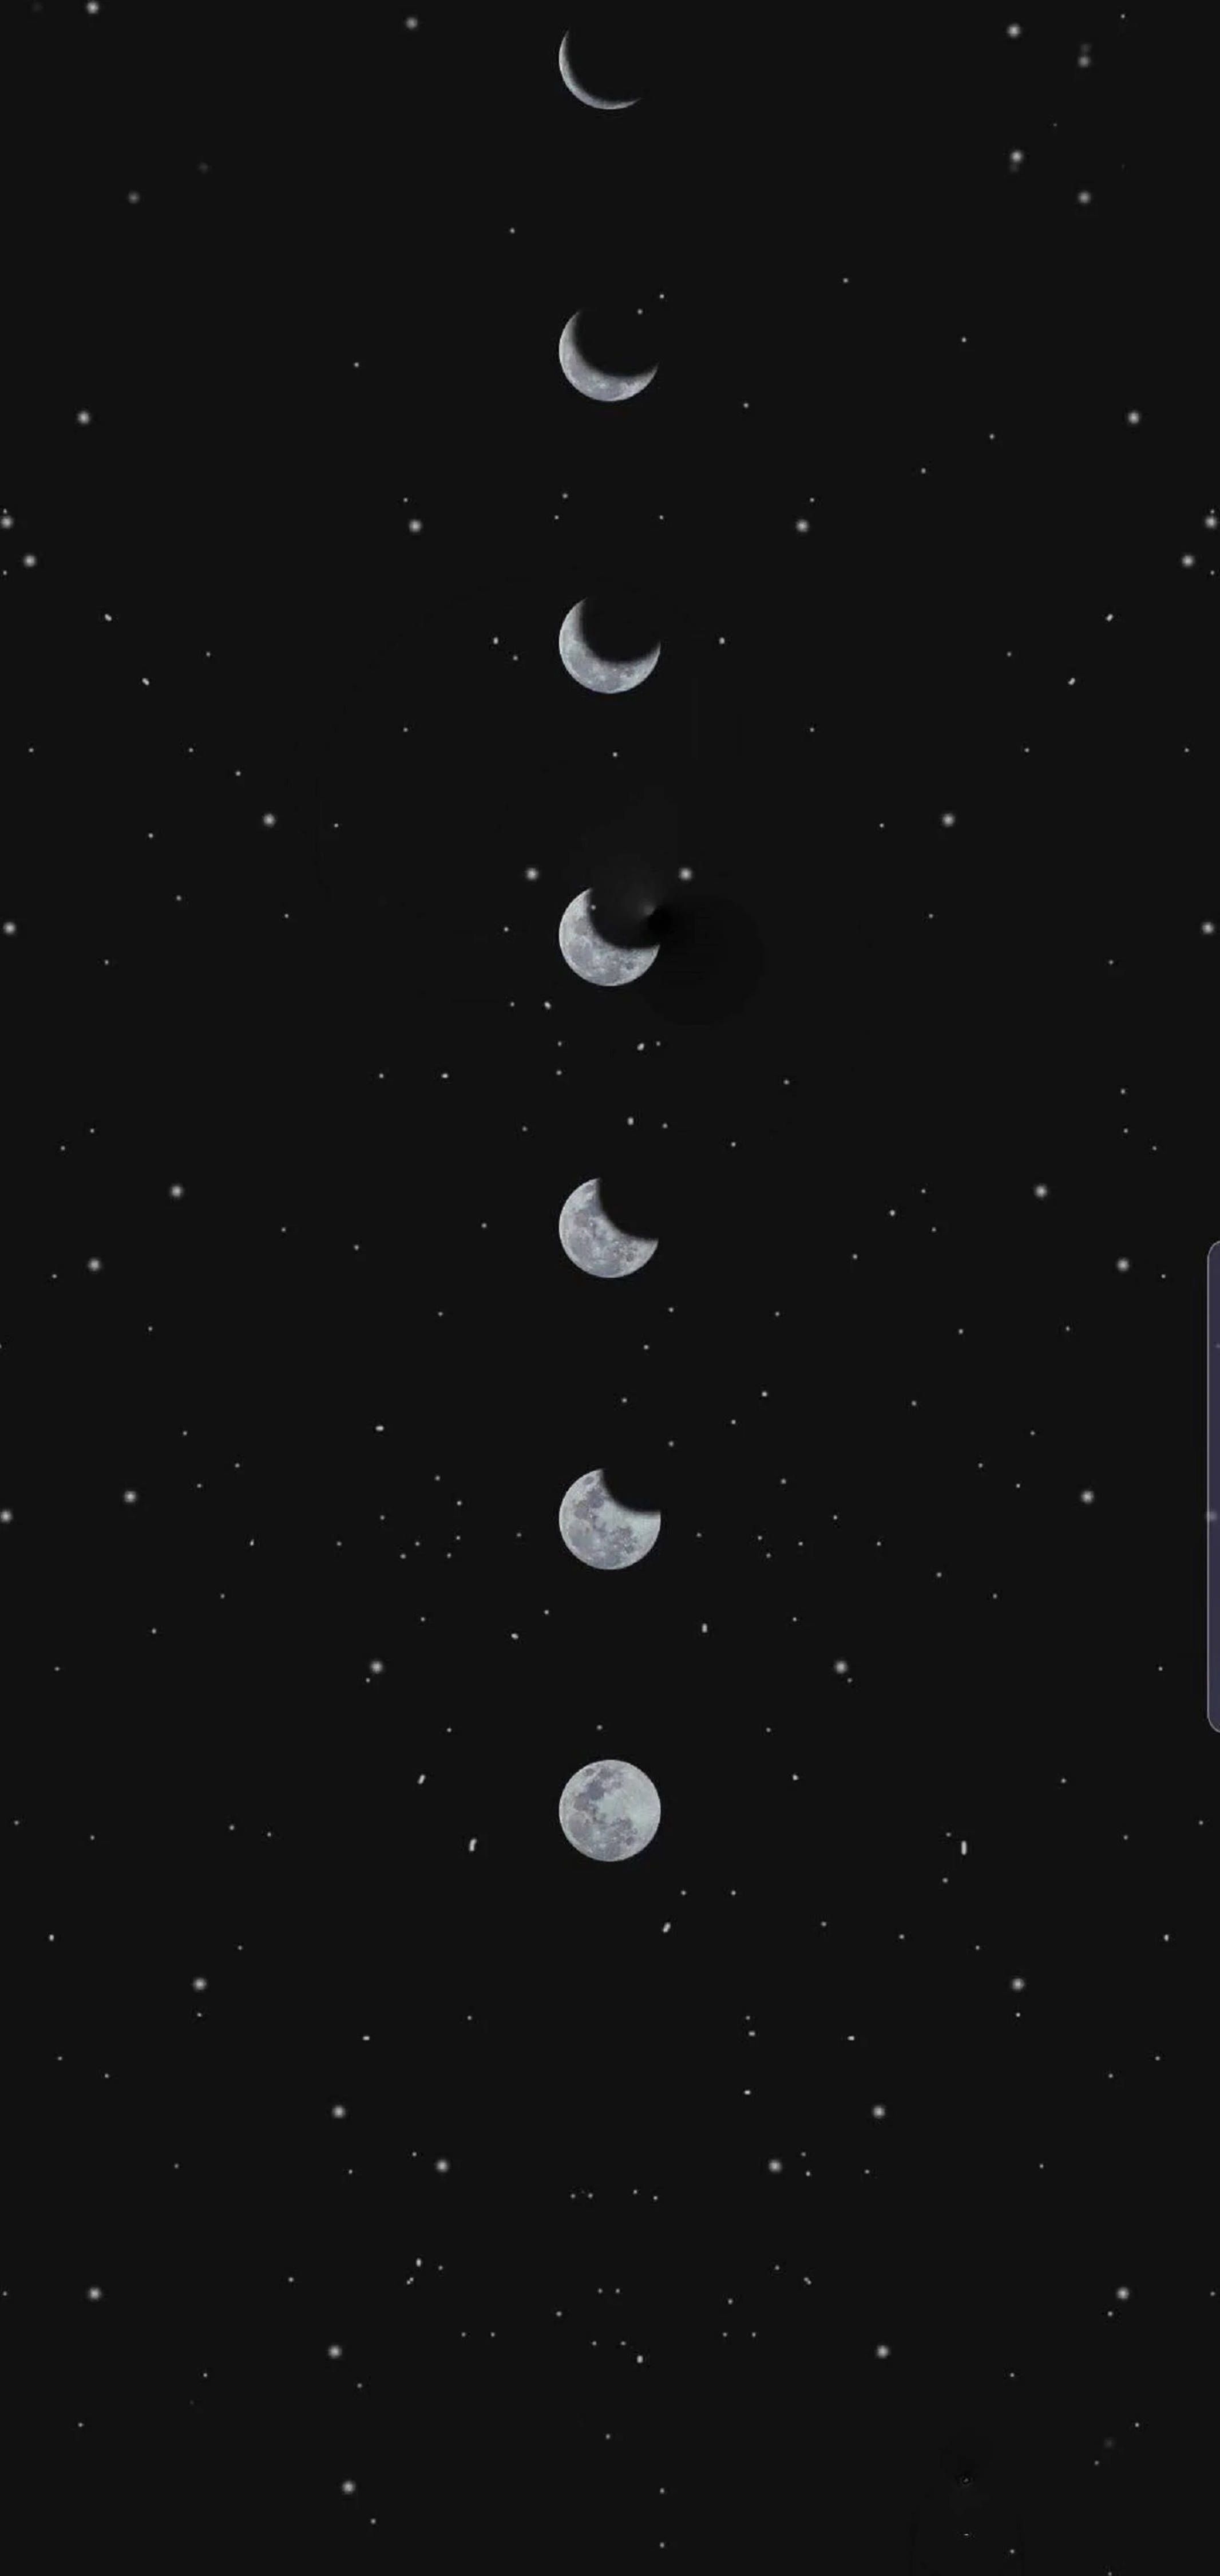 A screenshot of the game showing several planets in space - Moon phases